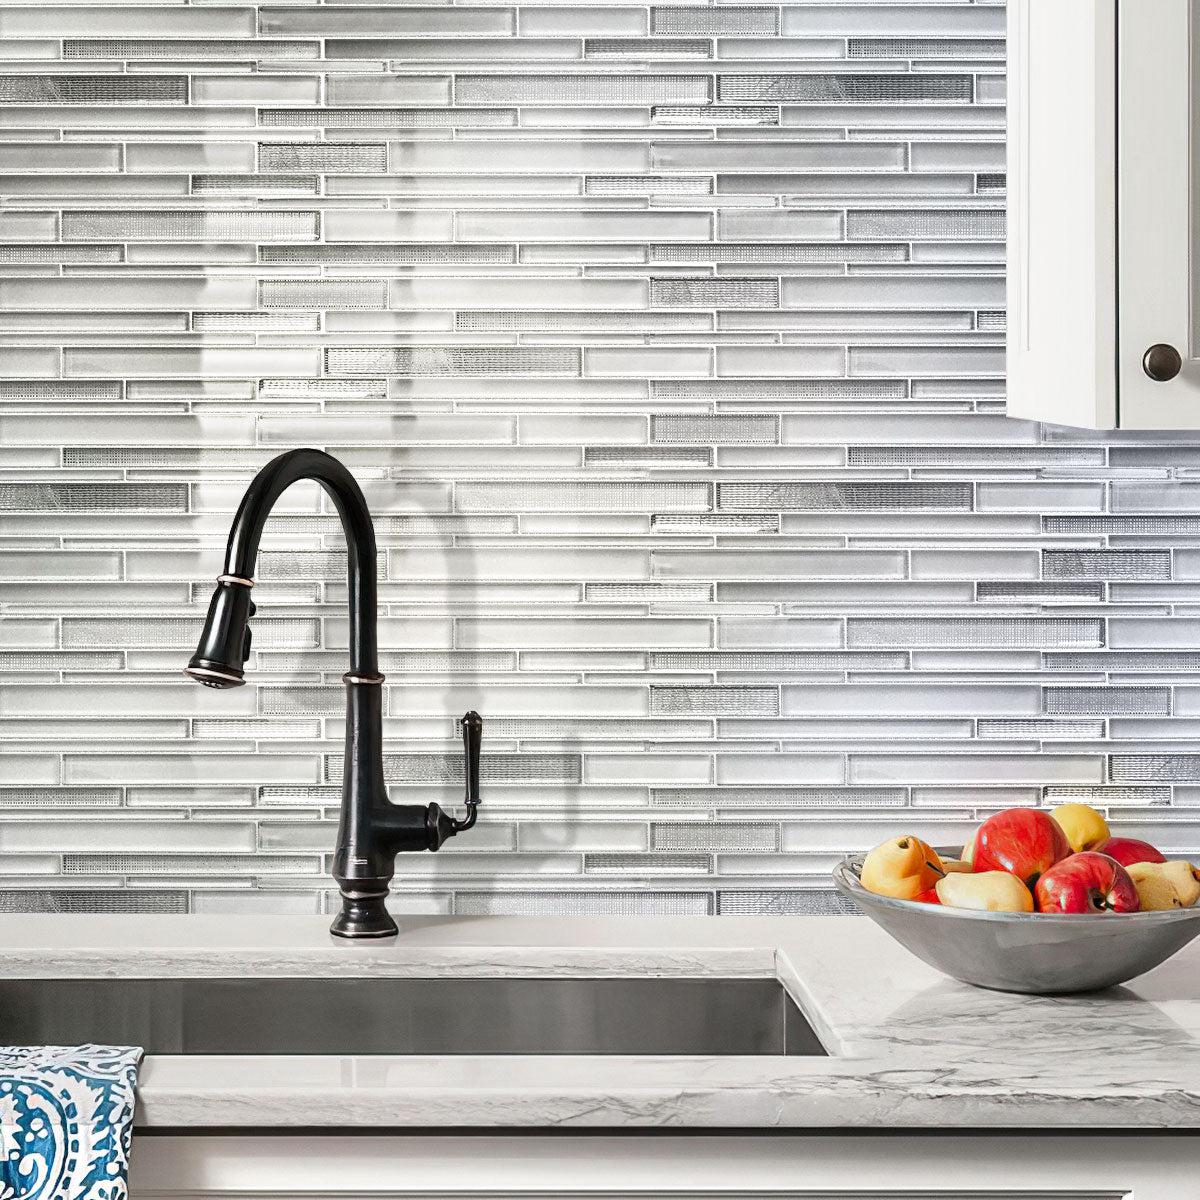 Ice White Linear Glass Mosaic Tile for a white and silver stacked backsplash